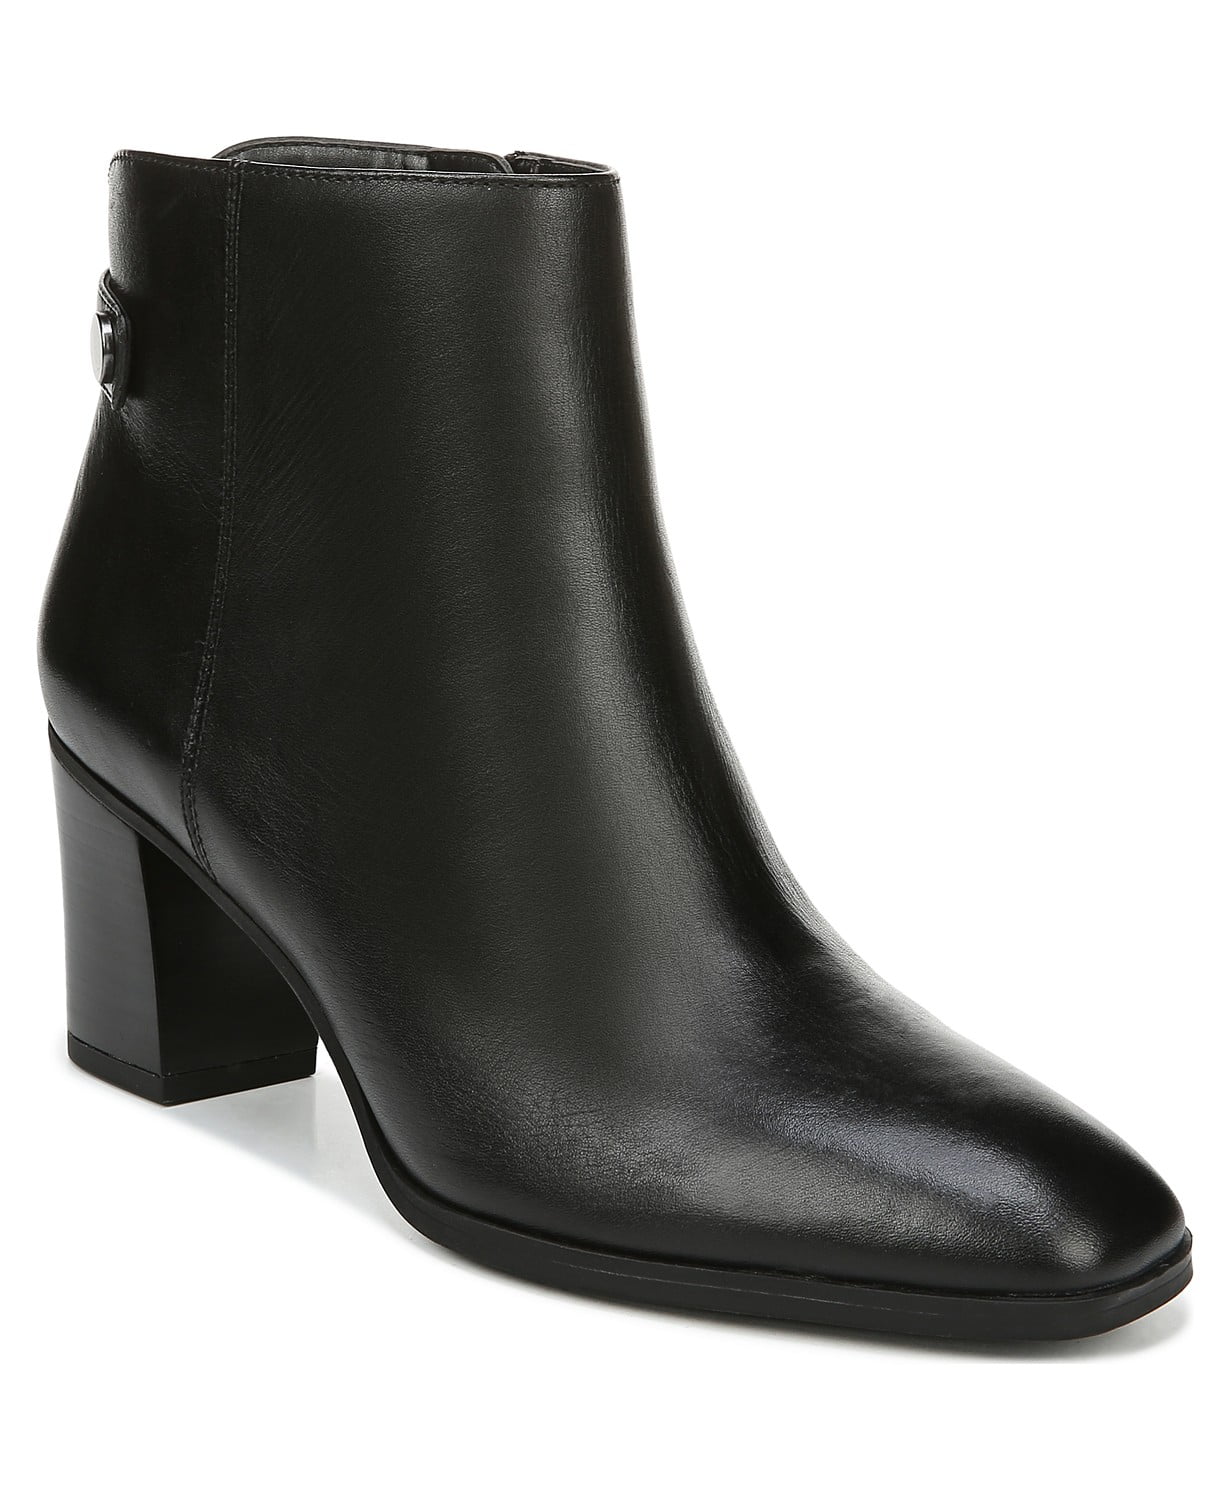 woocommerce-673321-2209615.cloudwaysapps.com-franco-sarto-womens-black-leather-ilaria-booties